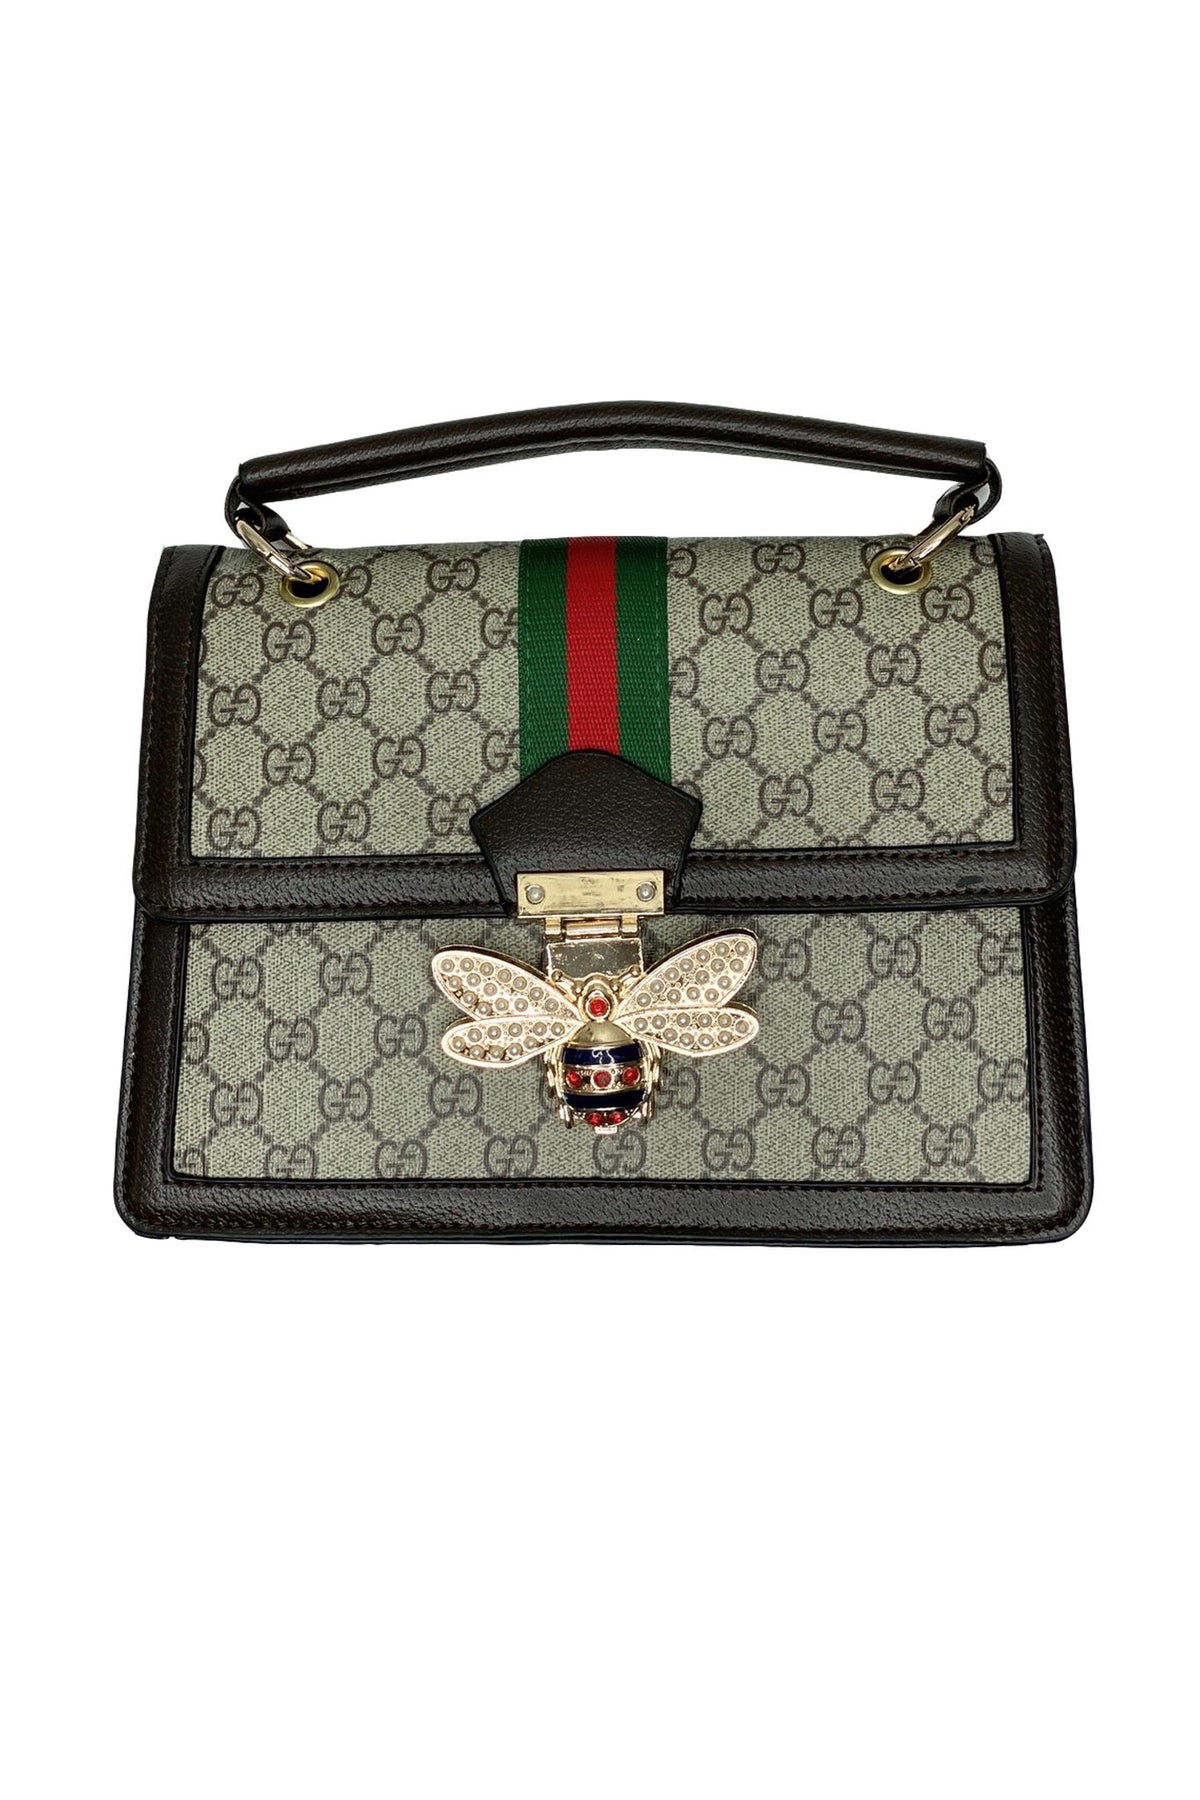 gucci bag with a bee